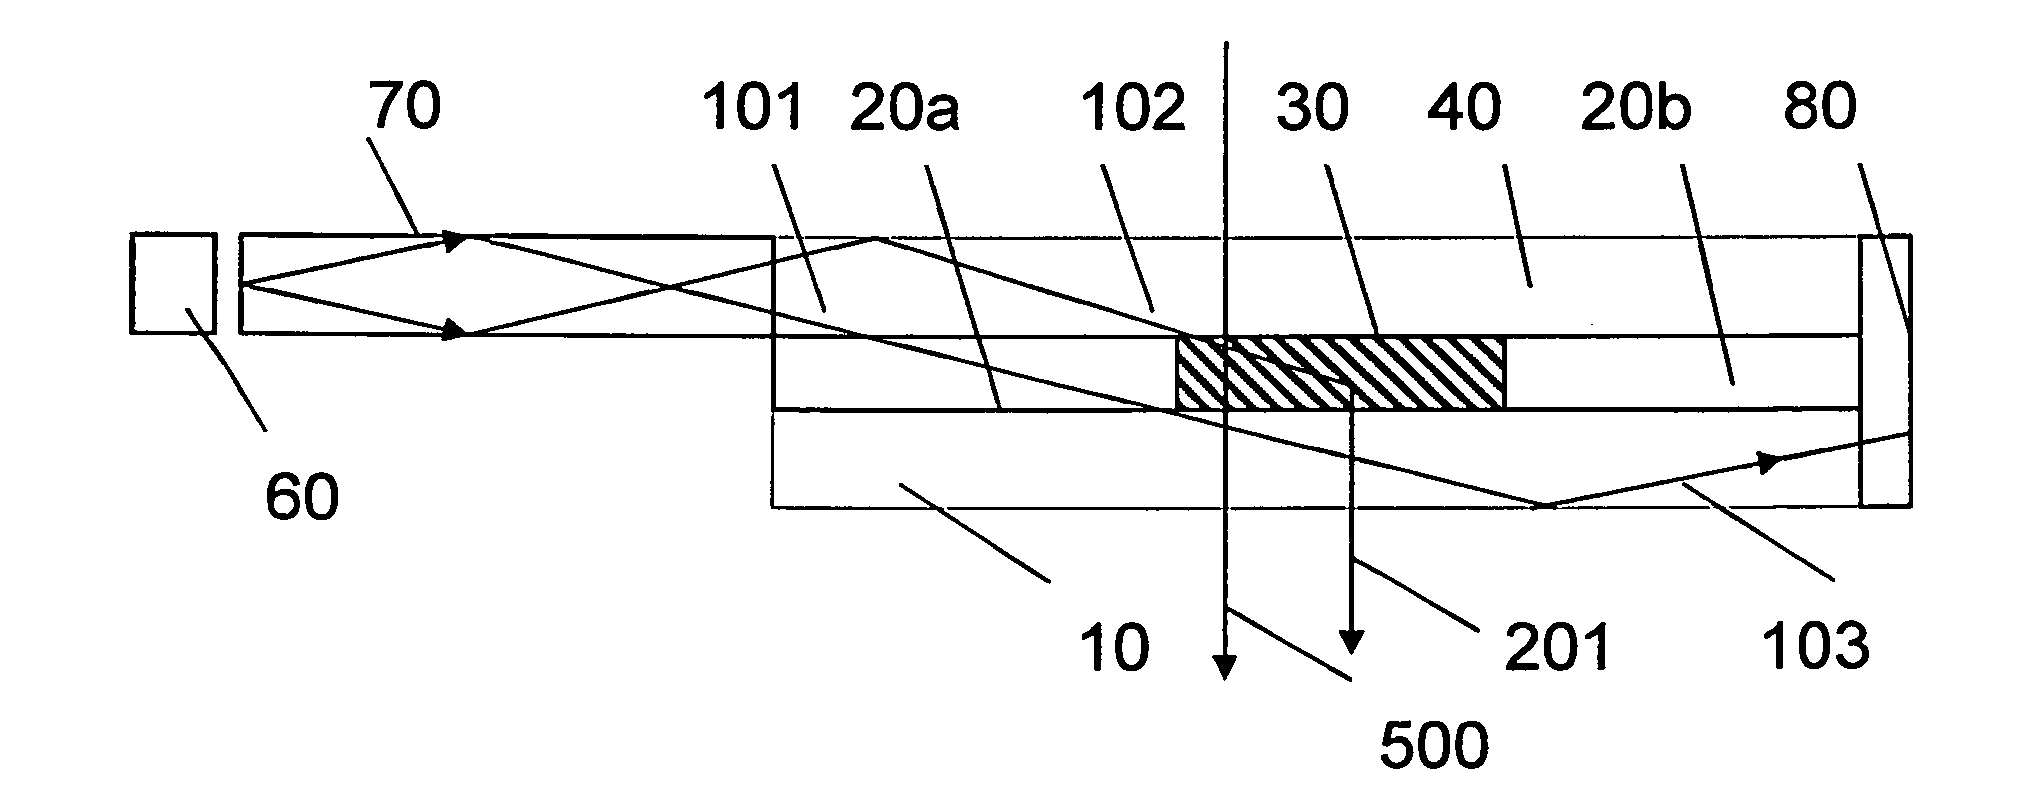 Holographic Waveguide Display